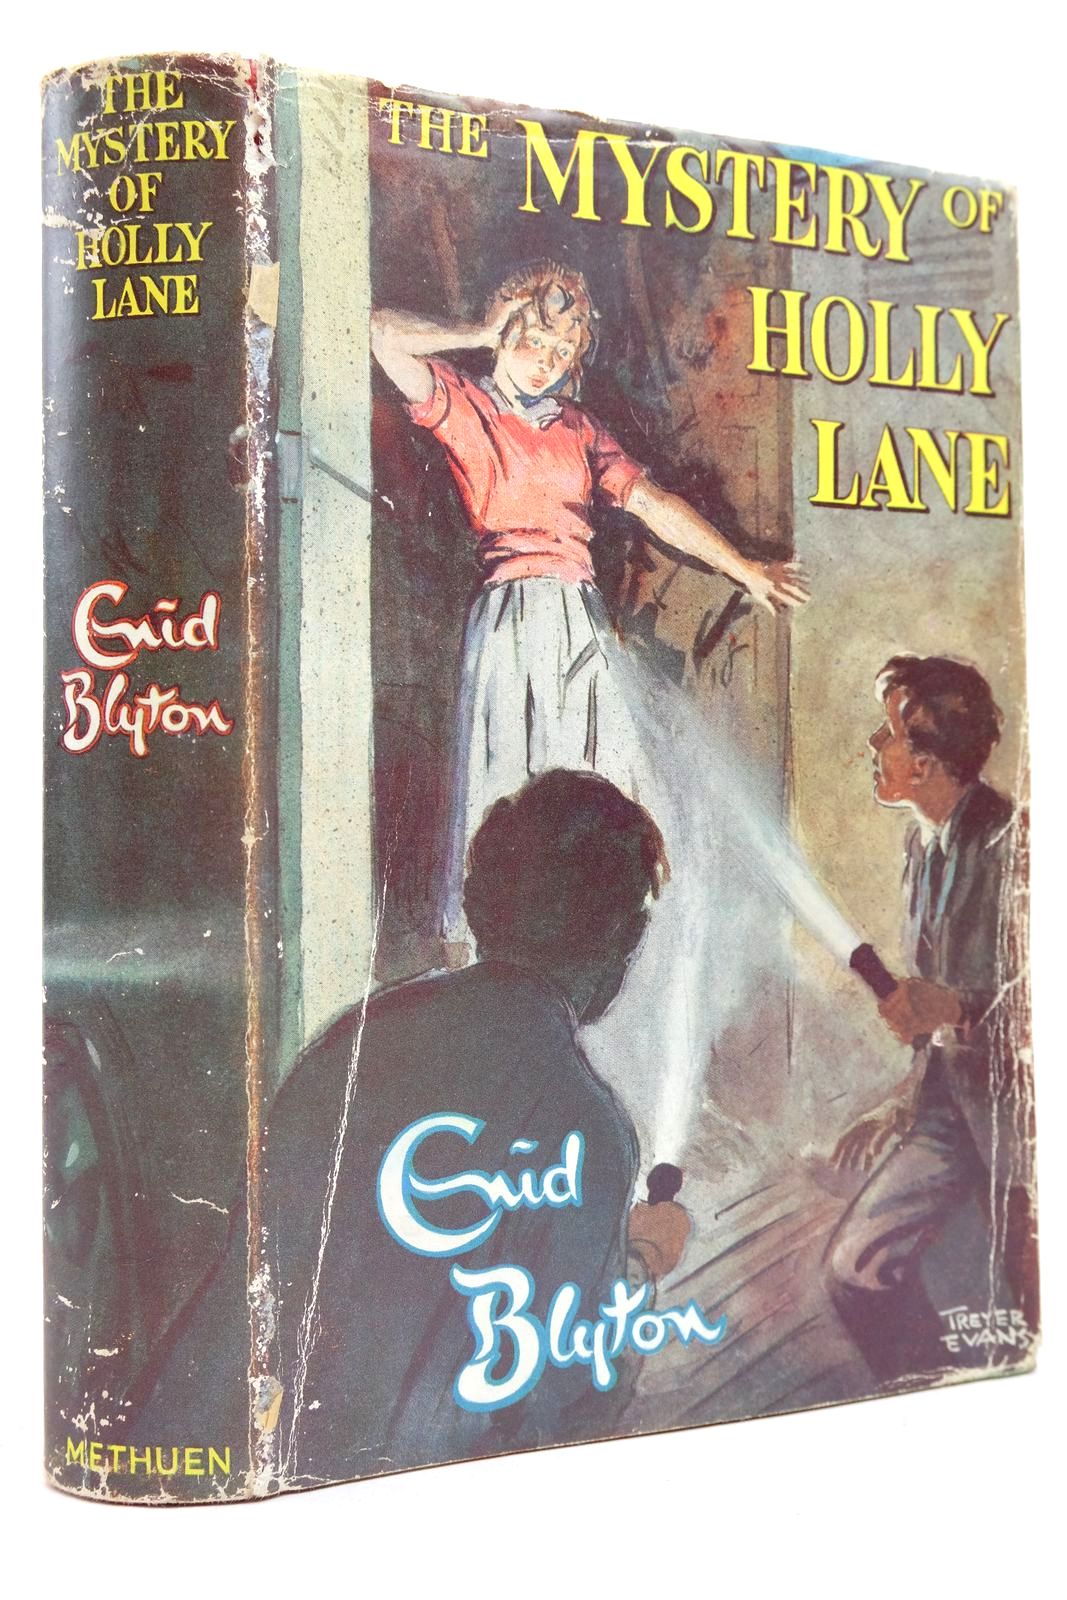 Photo of THE MYSTERY OF HOLLY LANE written by Blyton, Enid illustrated by Evans, Treyer published by Methuen & Co. Ltd. (STOCK CODE: 2140465)  for sale by Stella & Rose's Books